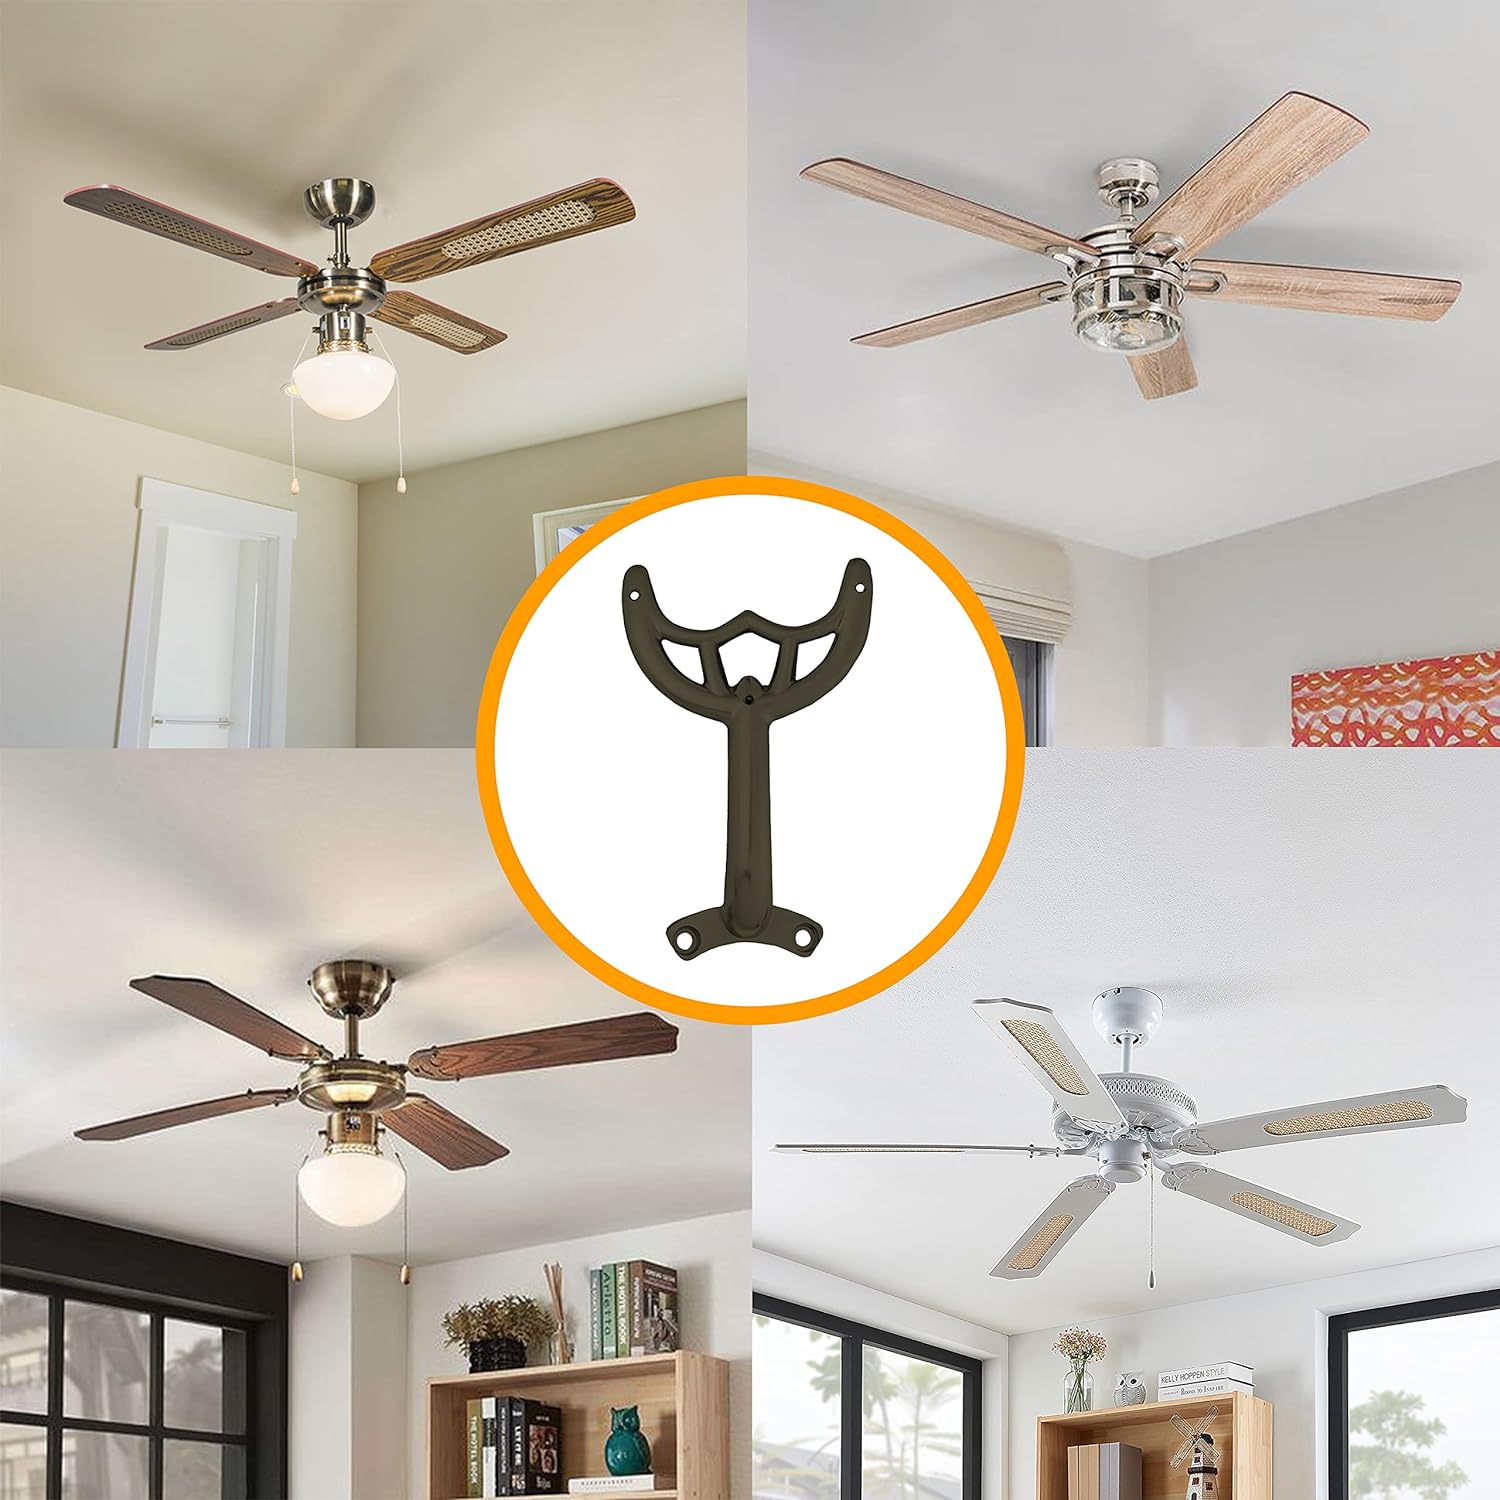 OhLectric Ceiling Replacement Fan Blade Arms - Perfect for Fitting With 52 Inch Fan Blades - Easy Installation - Mounting Instr